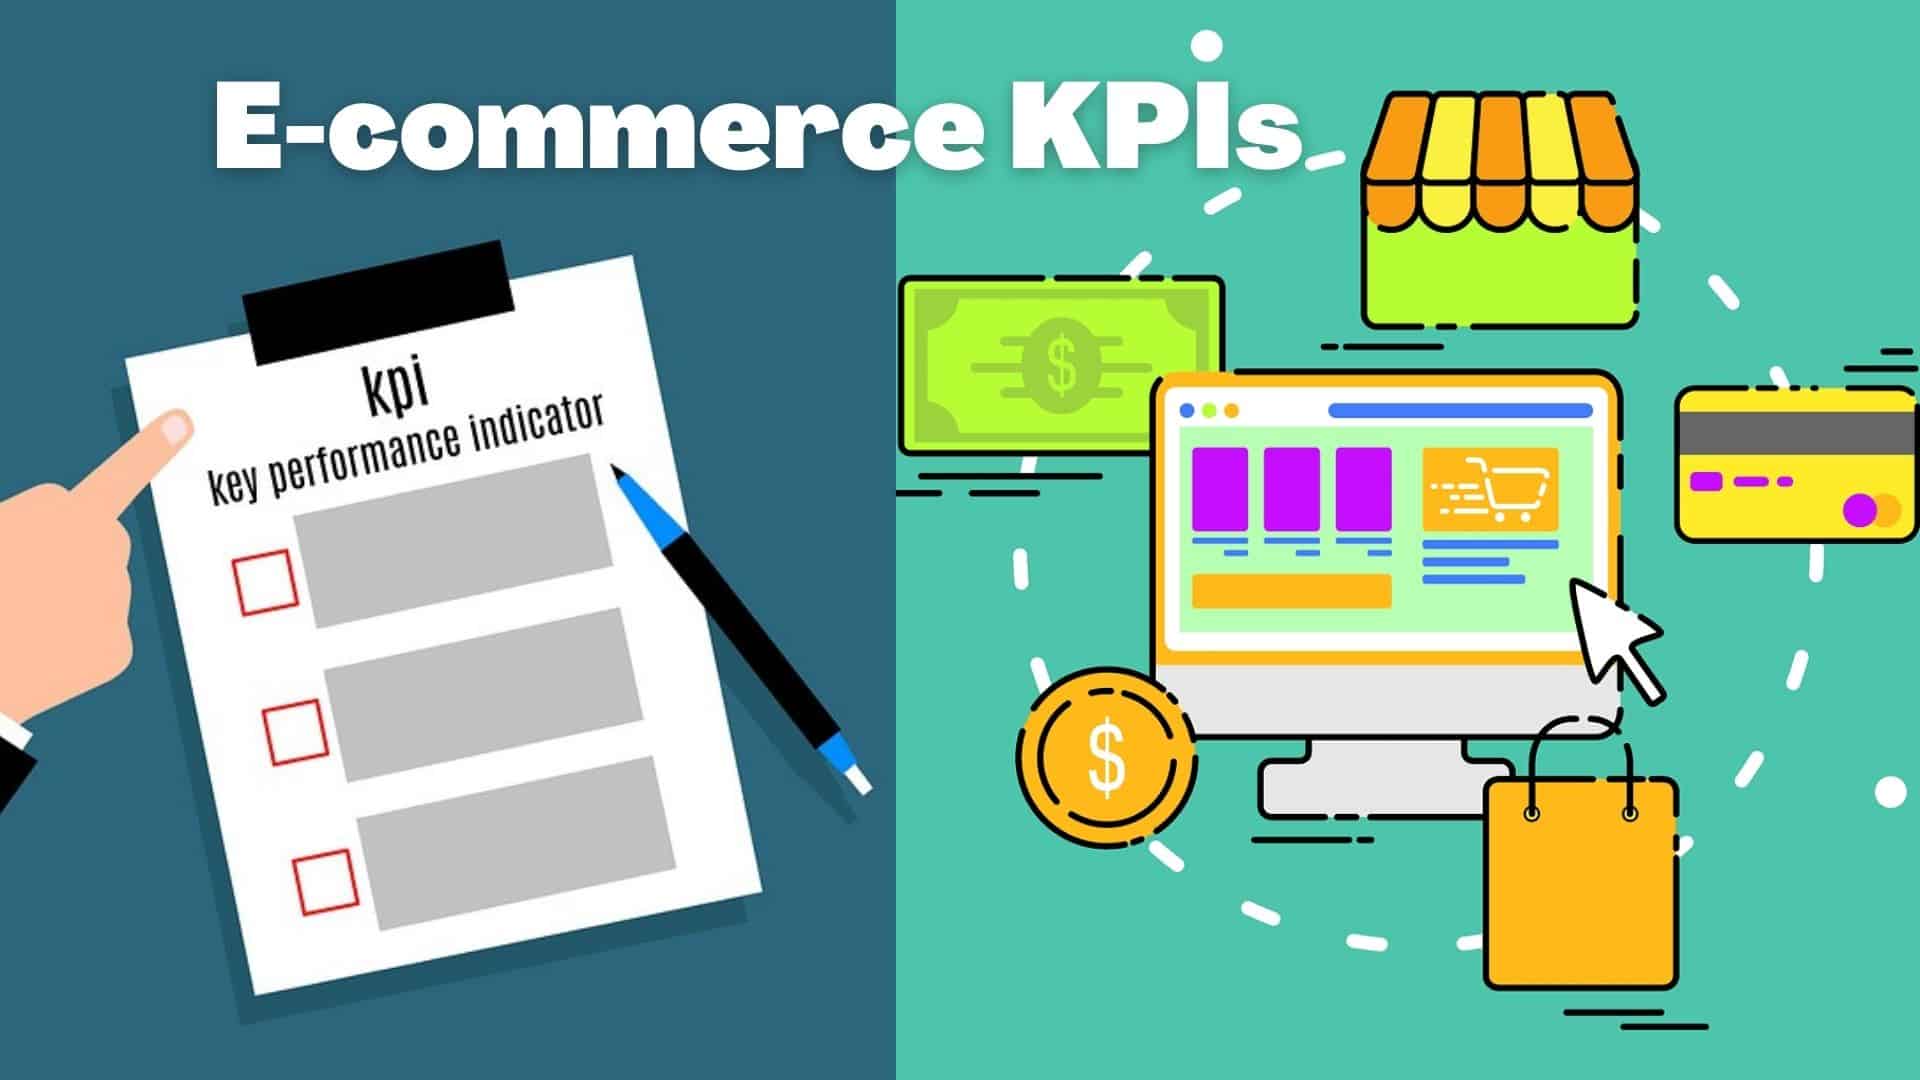 What are the KPIs for e-commerce?